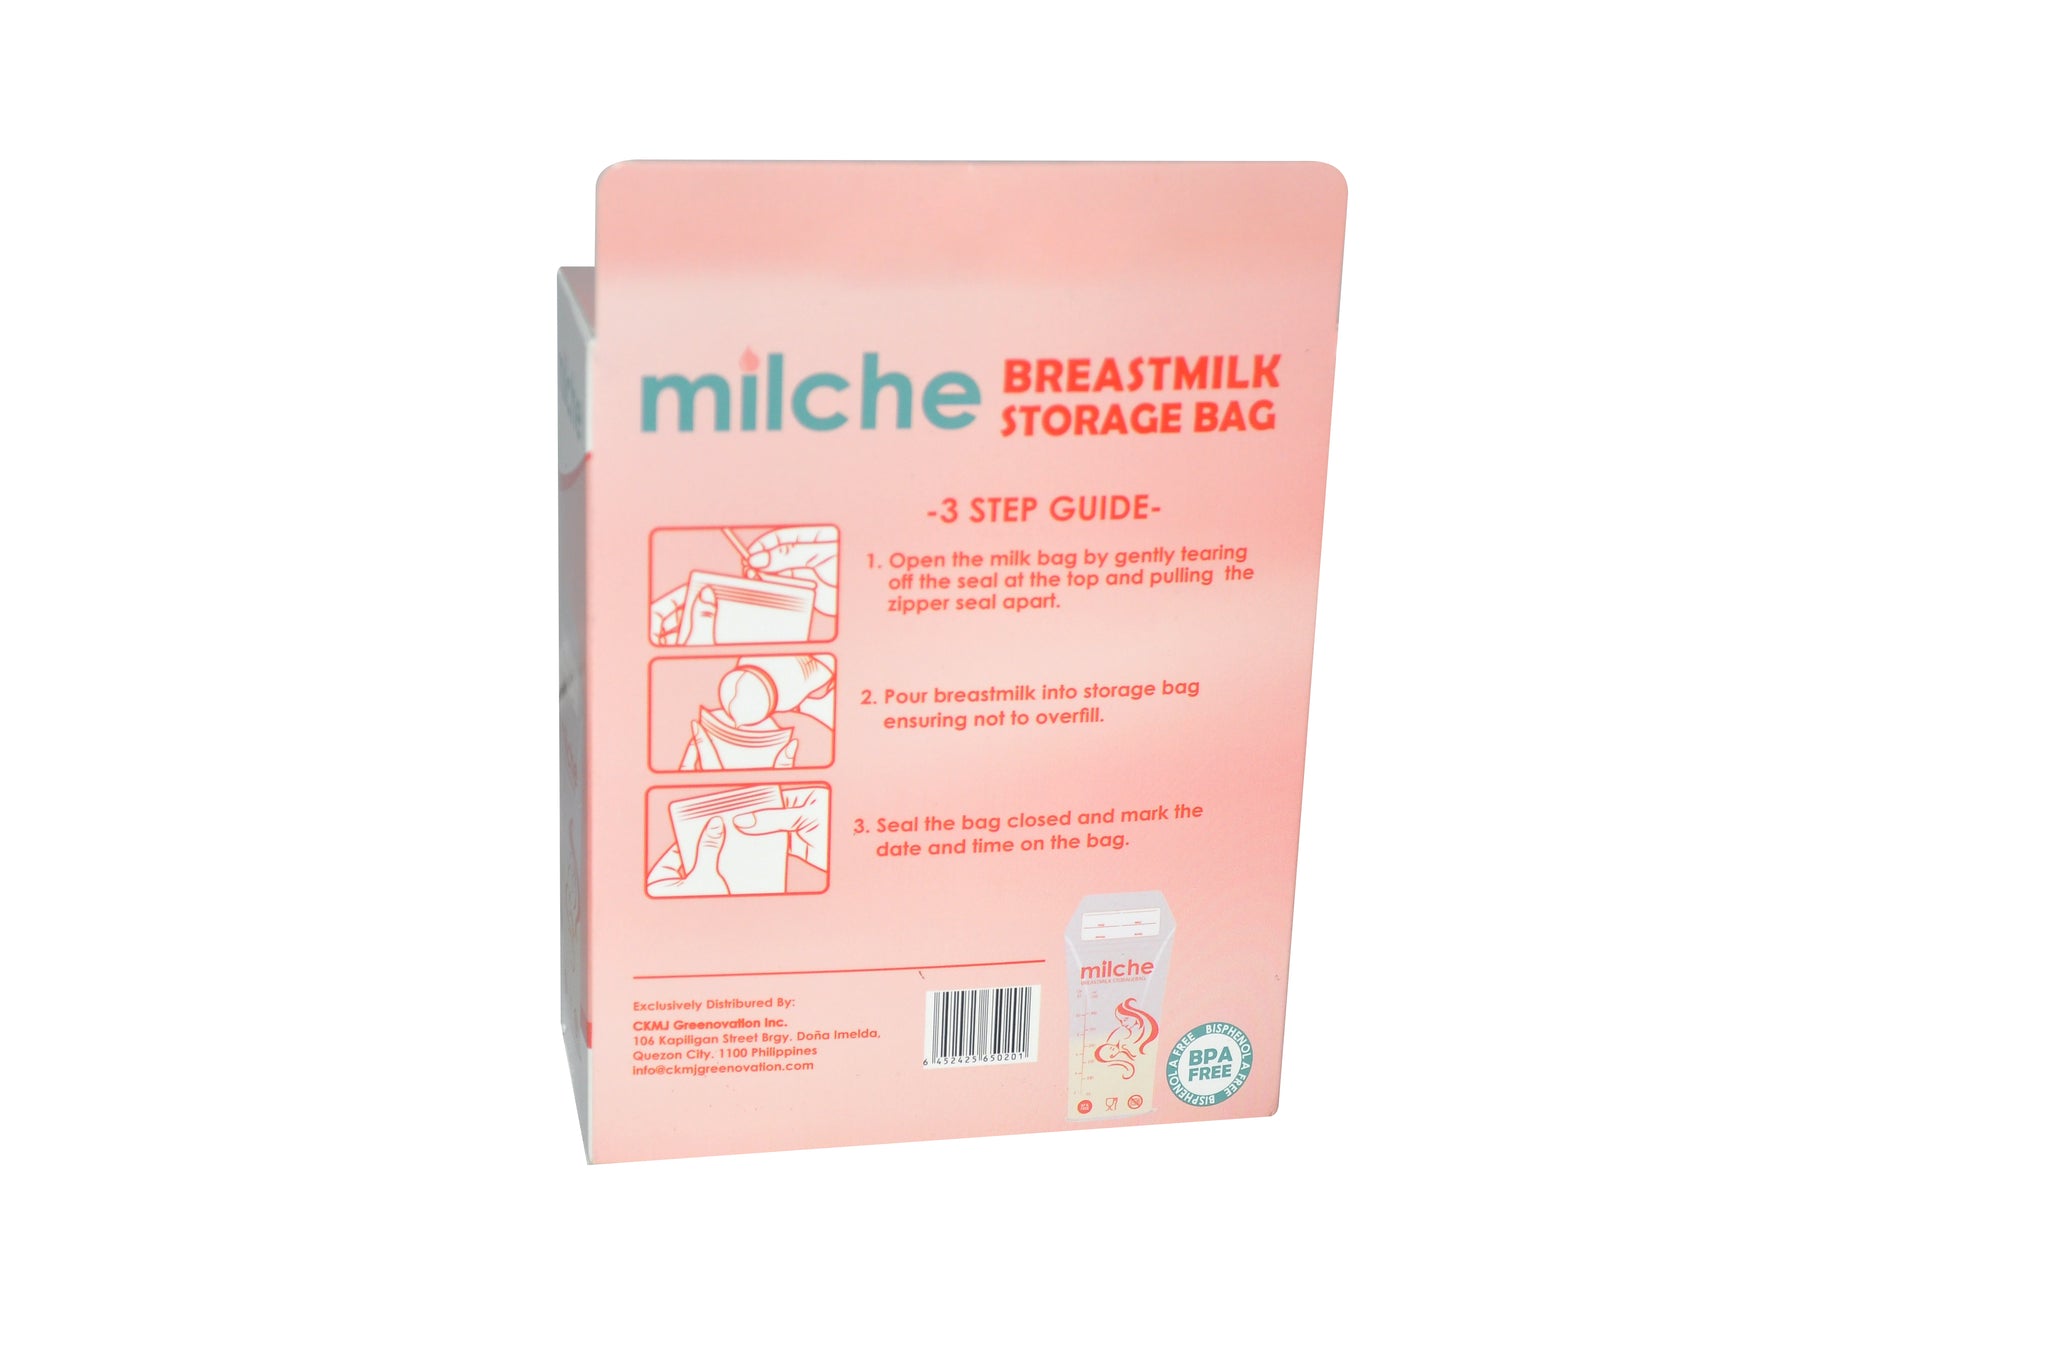 MrsMommyHolic: Other uses for breastmilk storage bags